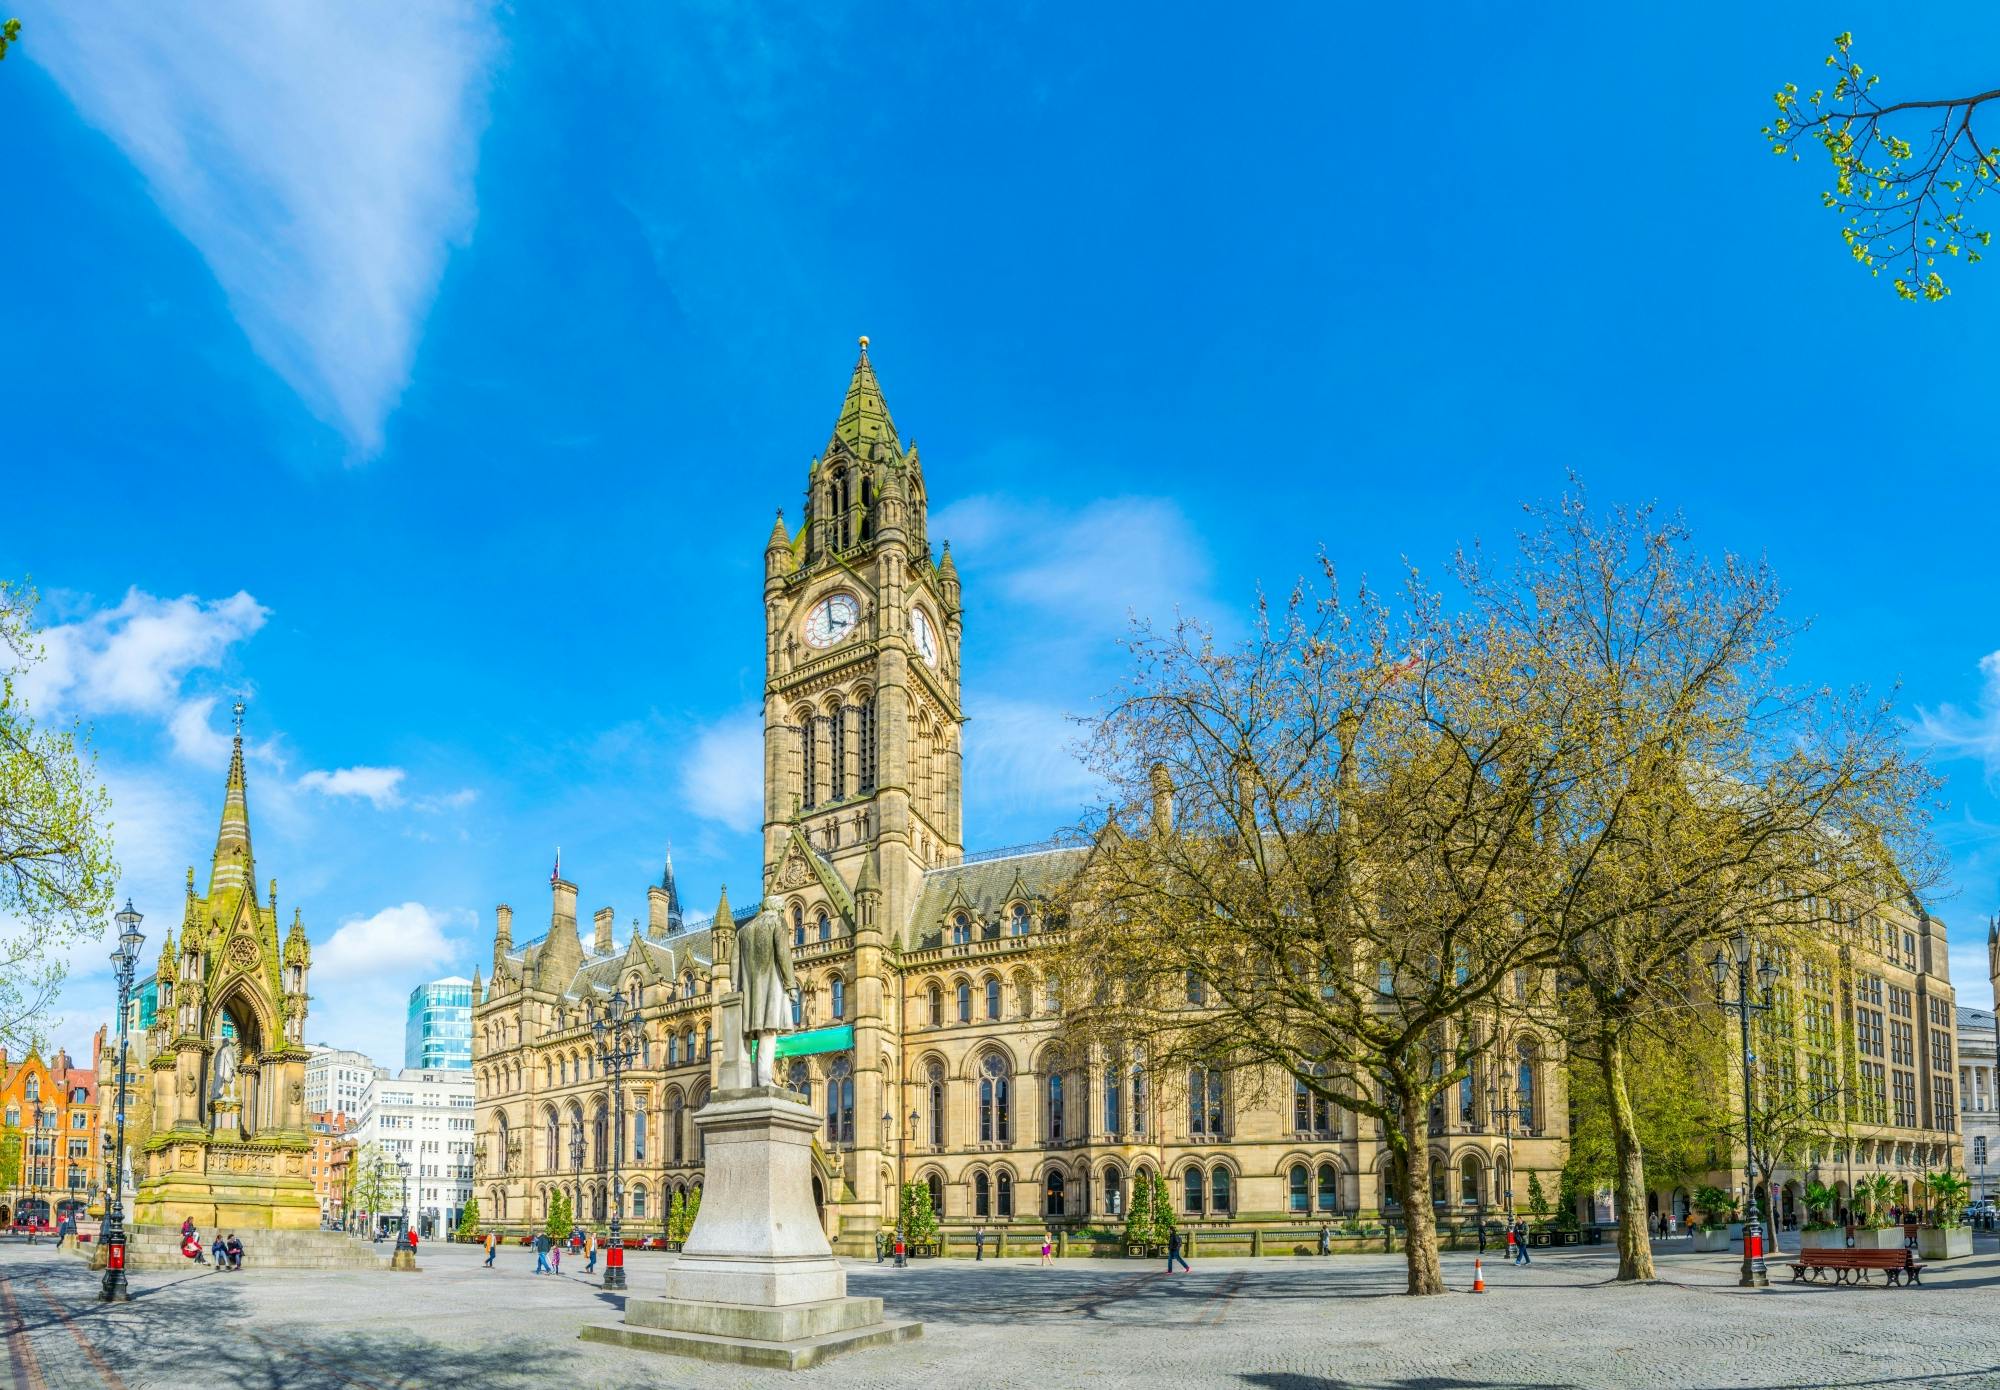 Manchester self-guided walking tour of the city center